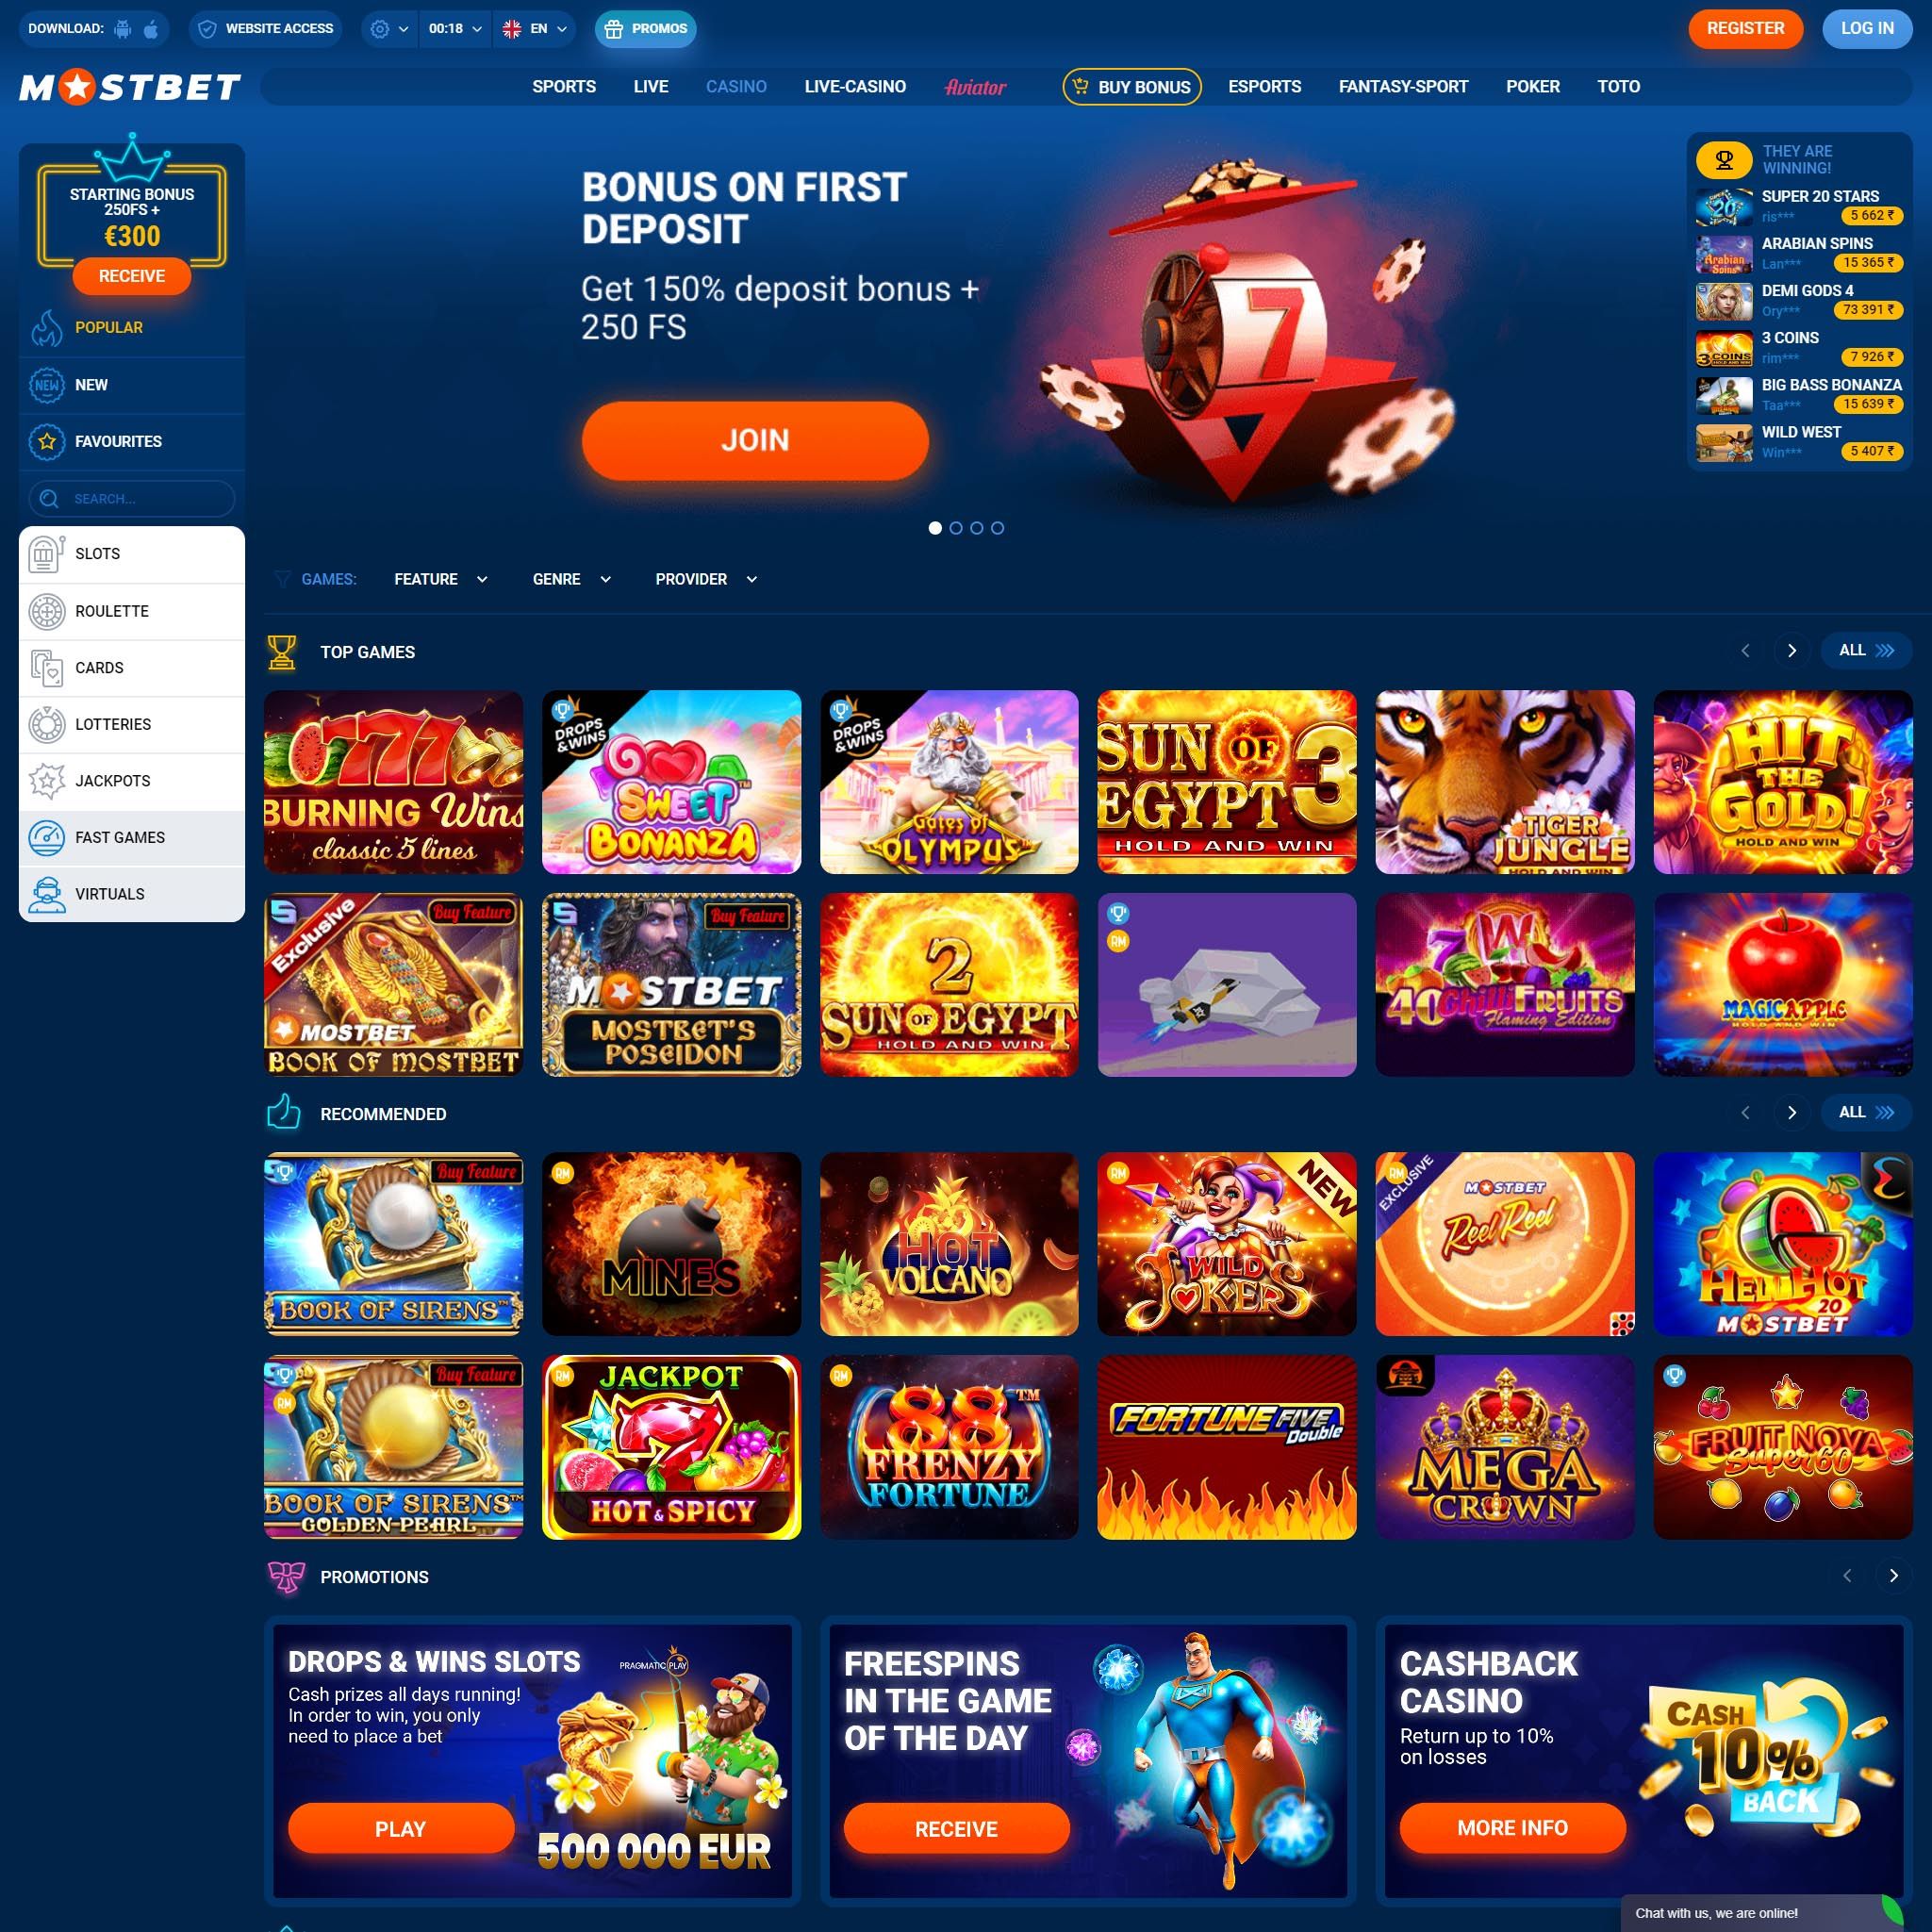 Mostbet Casino review by Mr. Gamble